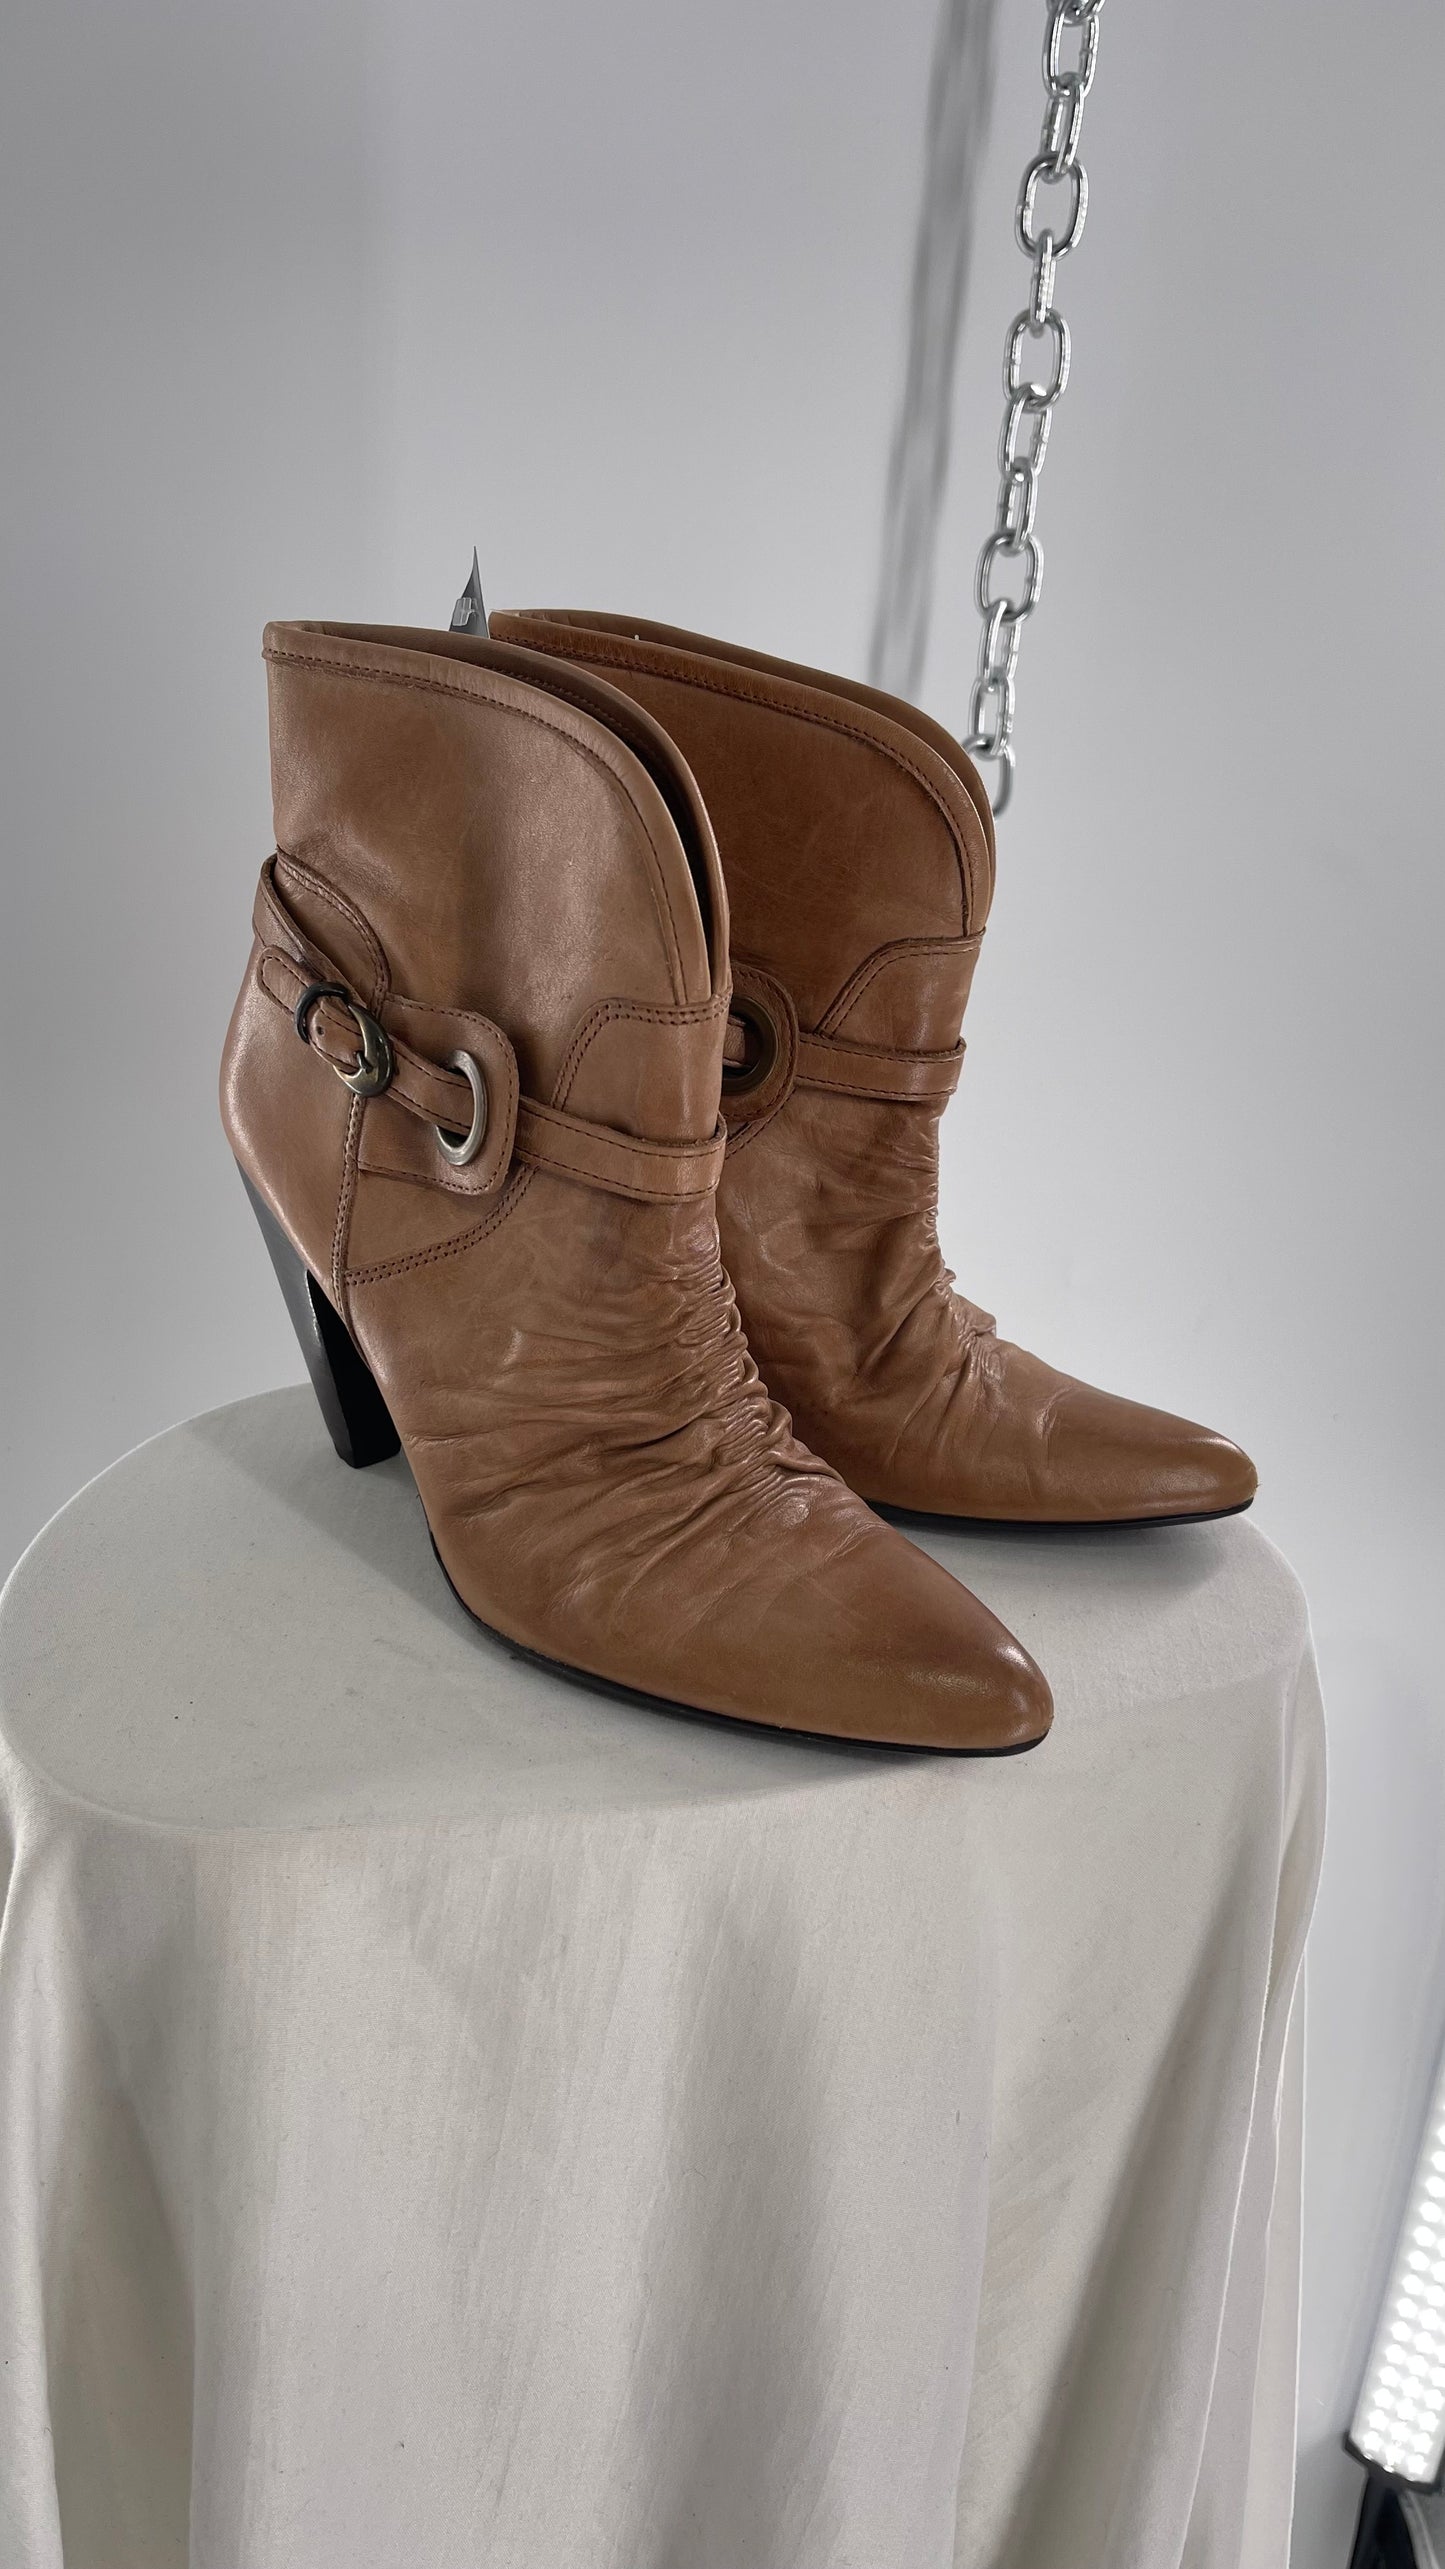 Vintage Pointed Toe Booties with Ruching and Belt Detail Made in Brazil